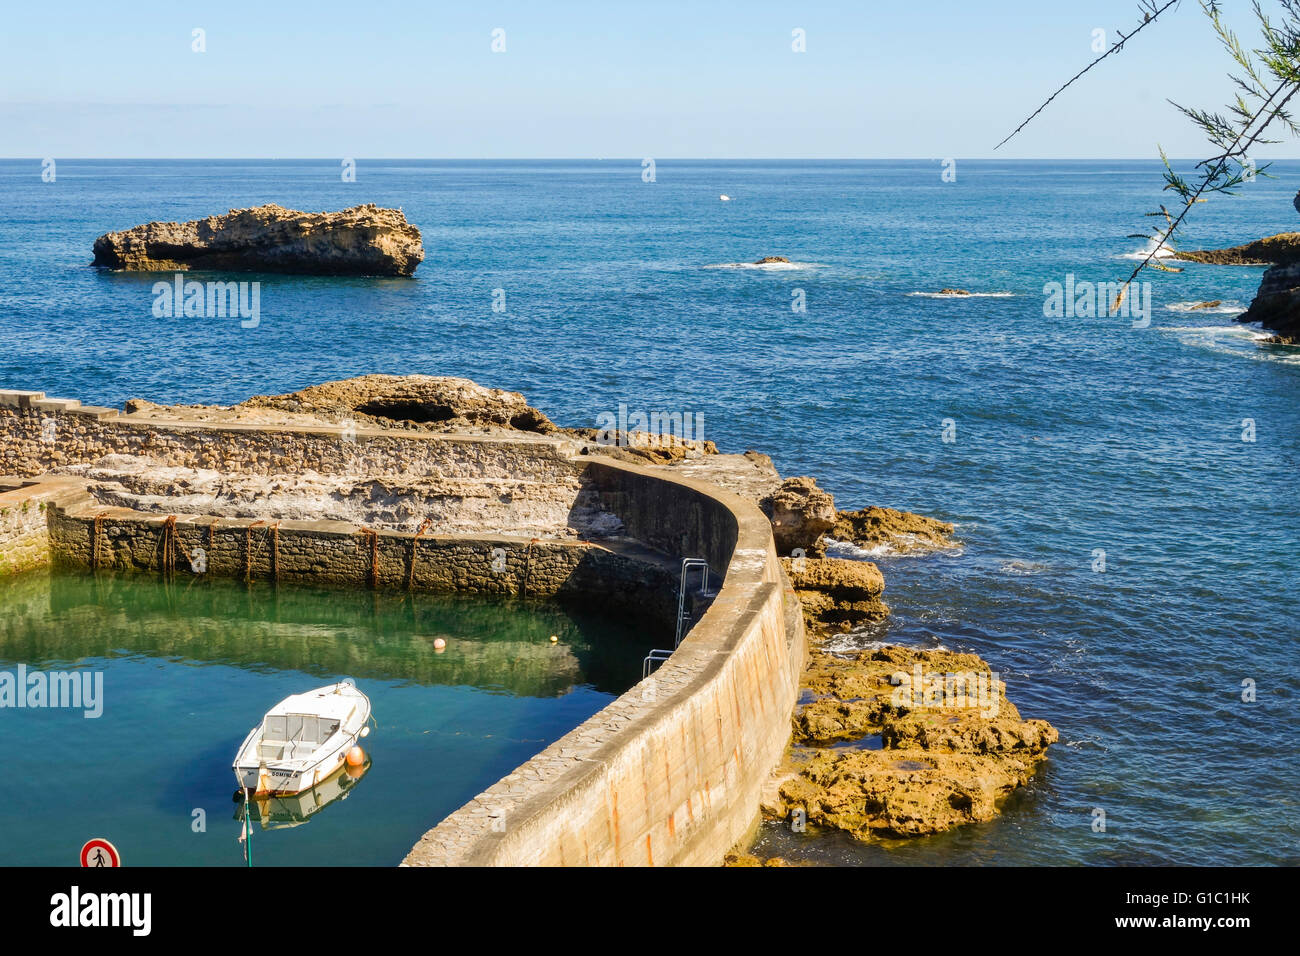 Small boat at Port des Pêcheurs, old fishermen port, Biarritz. Aquitaine, basque country, France. Stock Photo